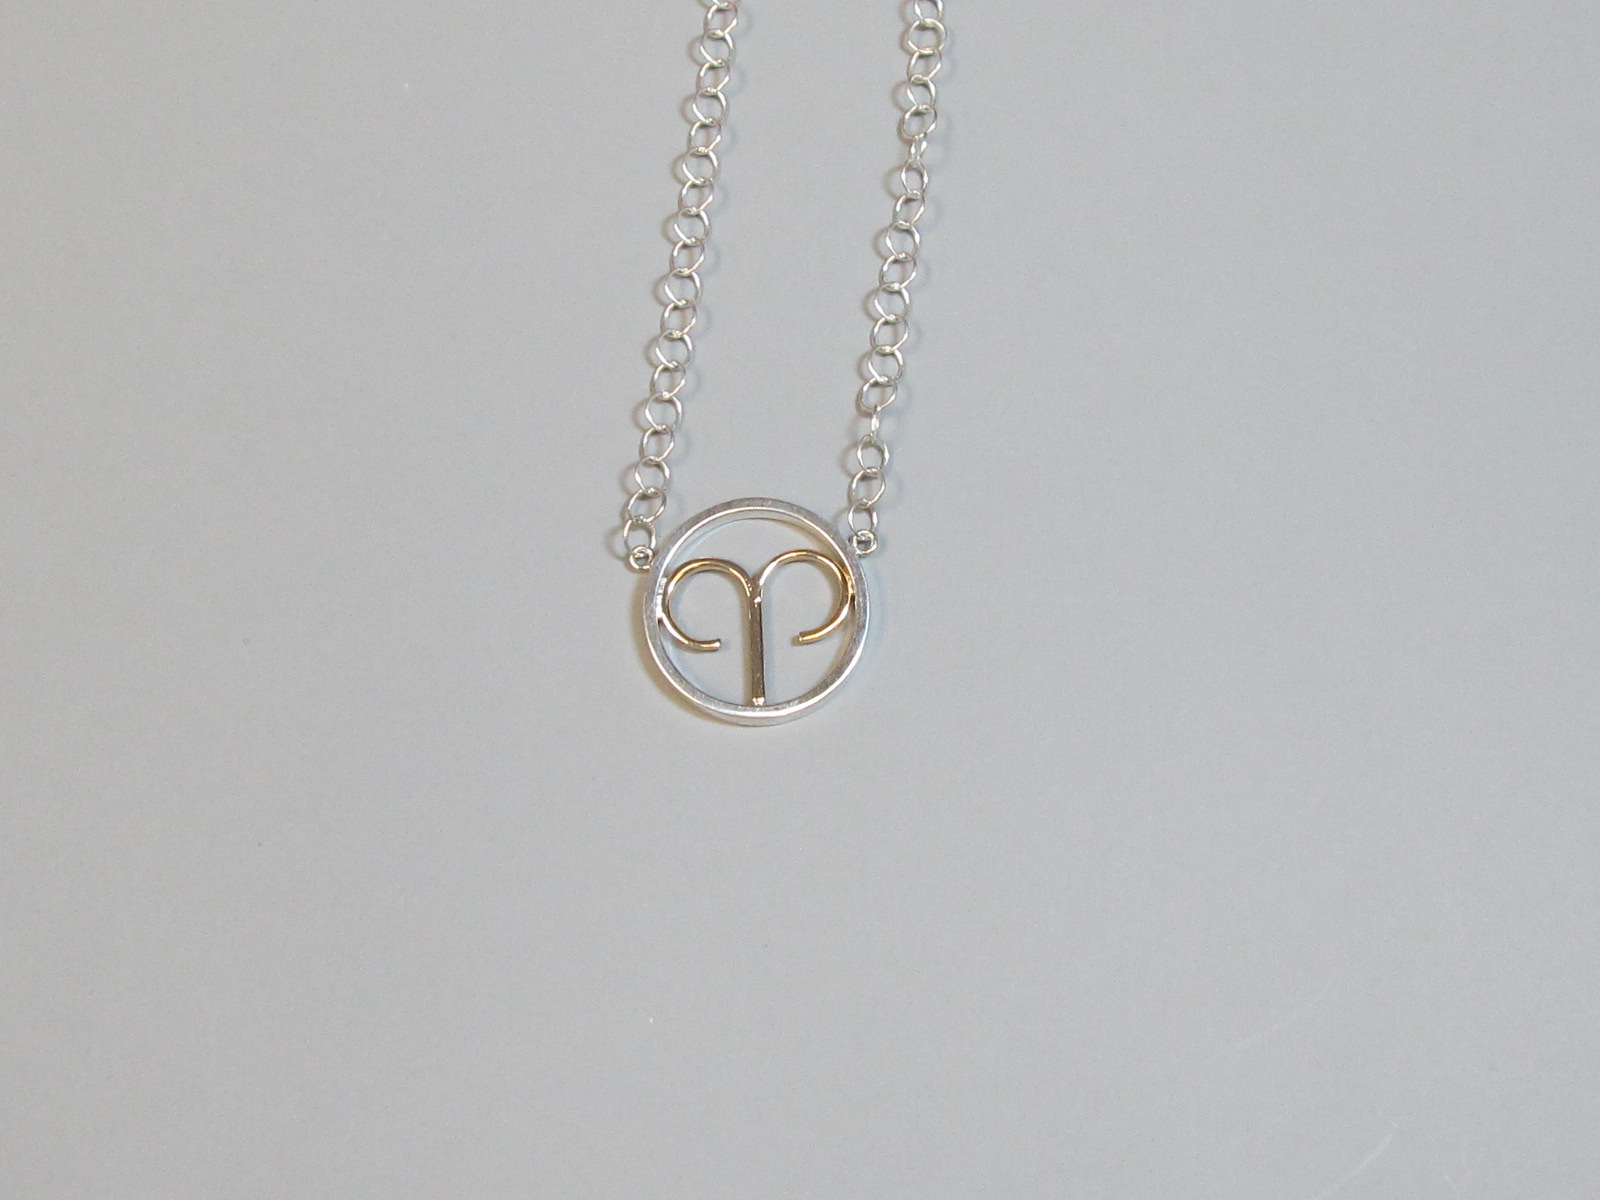 Aries Zodiac Necklace Sterling Silver with 14K Yellow Gold